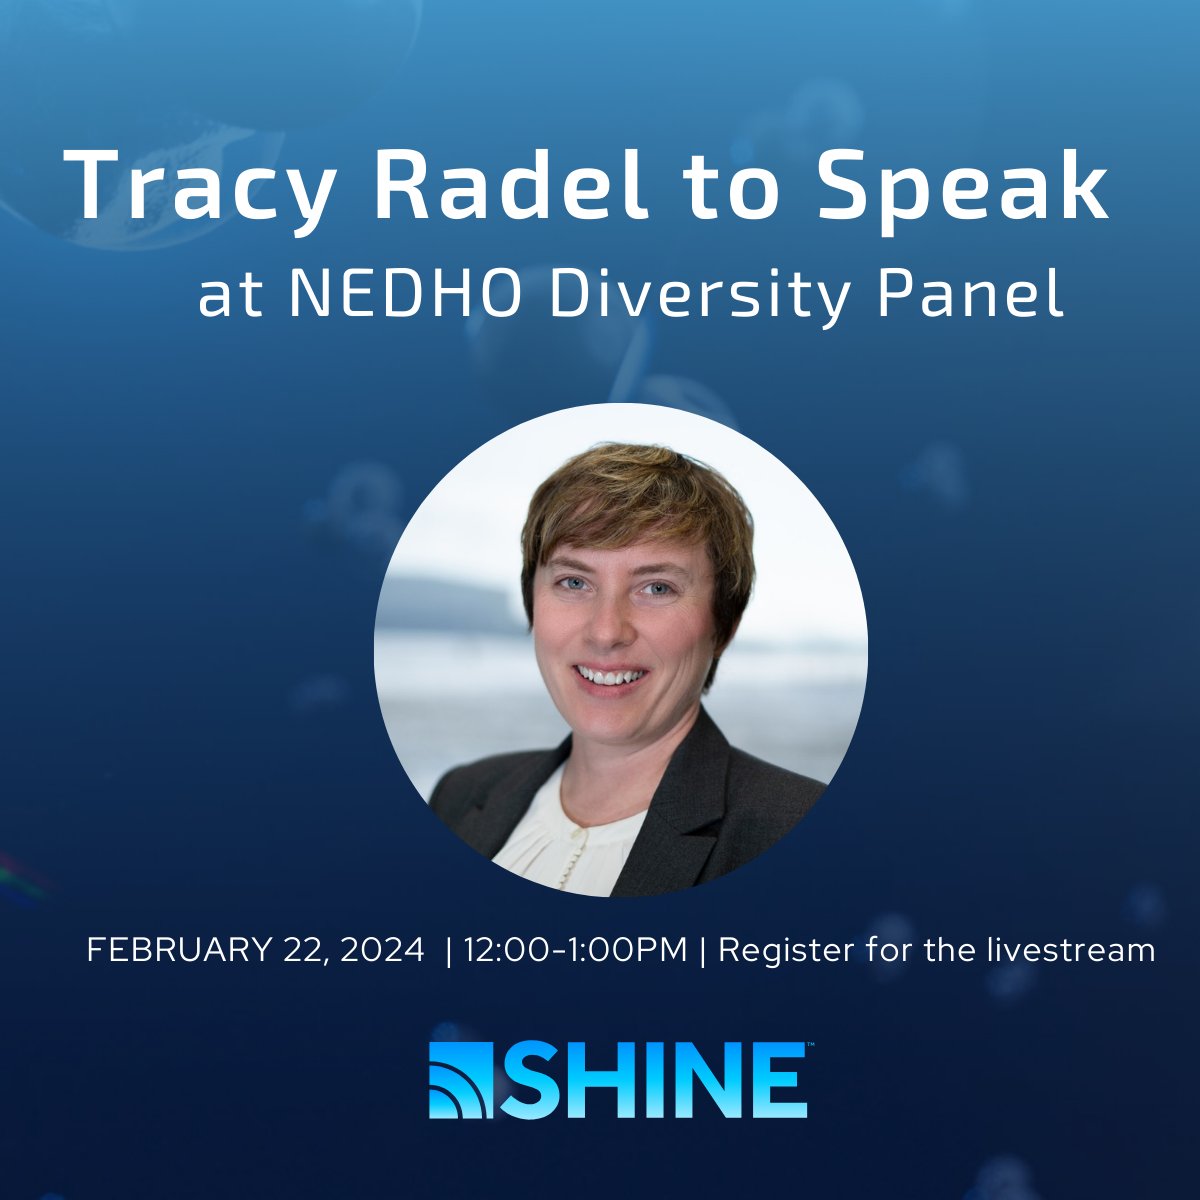 Tomorrow is Introduce a Girl to Engineering Day. Join us as Tracy Radel, SHINE’s Vice President of Engineering, takes the stage with other panelists to celebrate women in the nuclear industry. Register now to watch the live stream at NOON tomorrow! hubs.li/Q02lRLM30